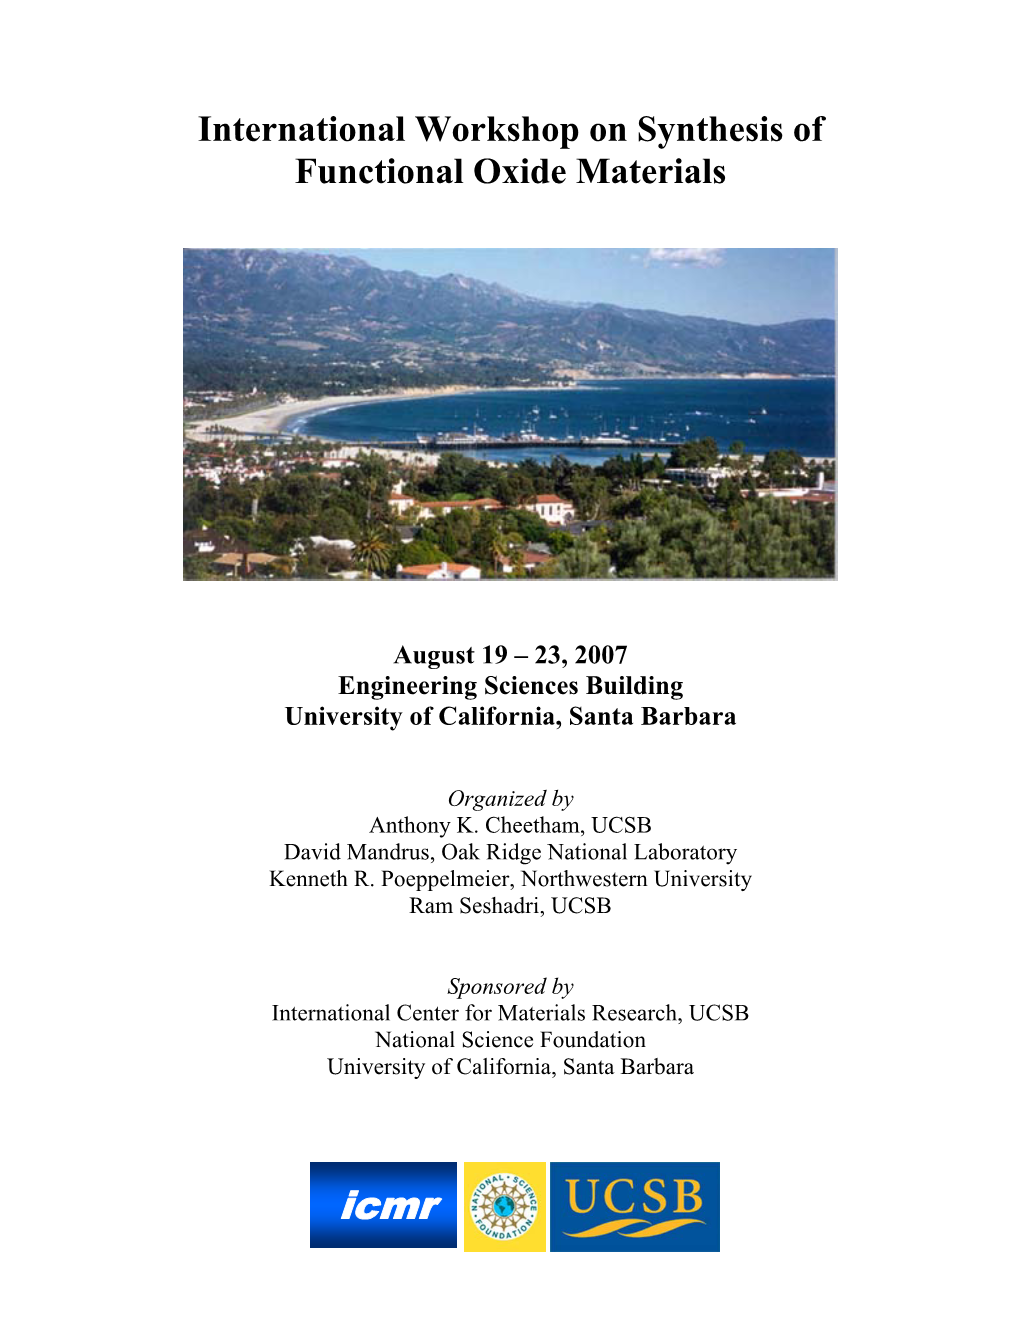 International Workshop on Synthesis of Functional Oxide Materials